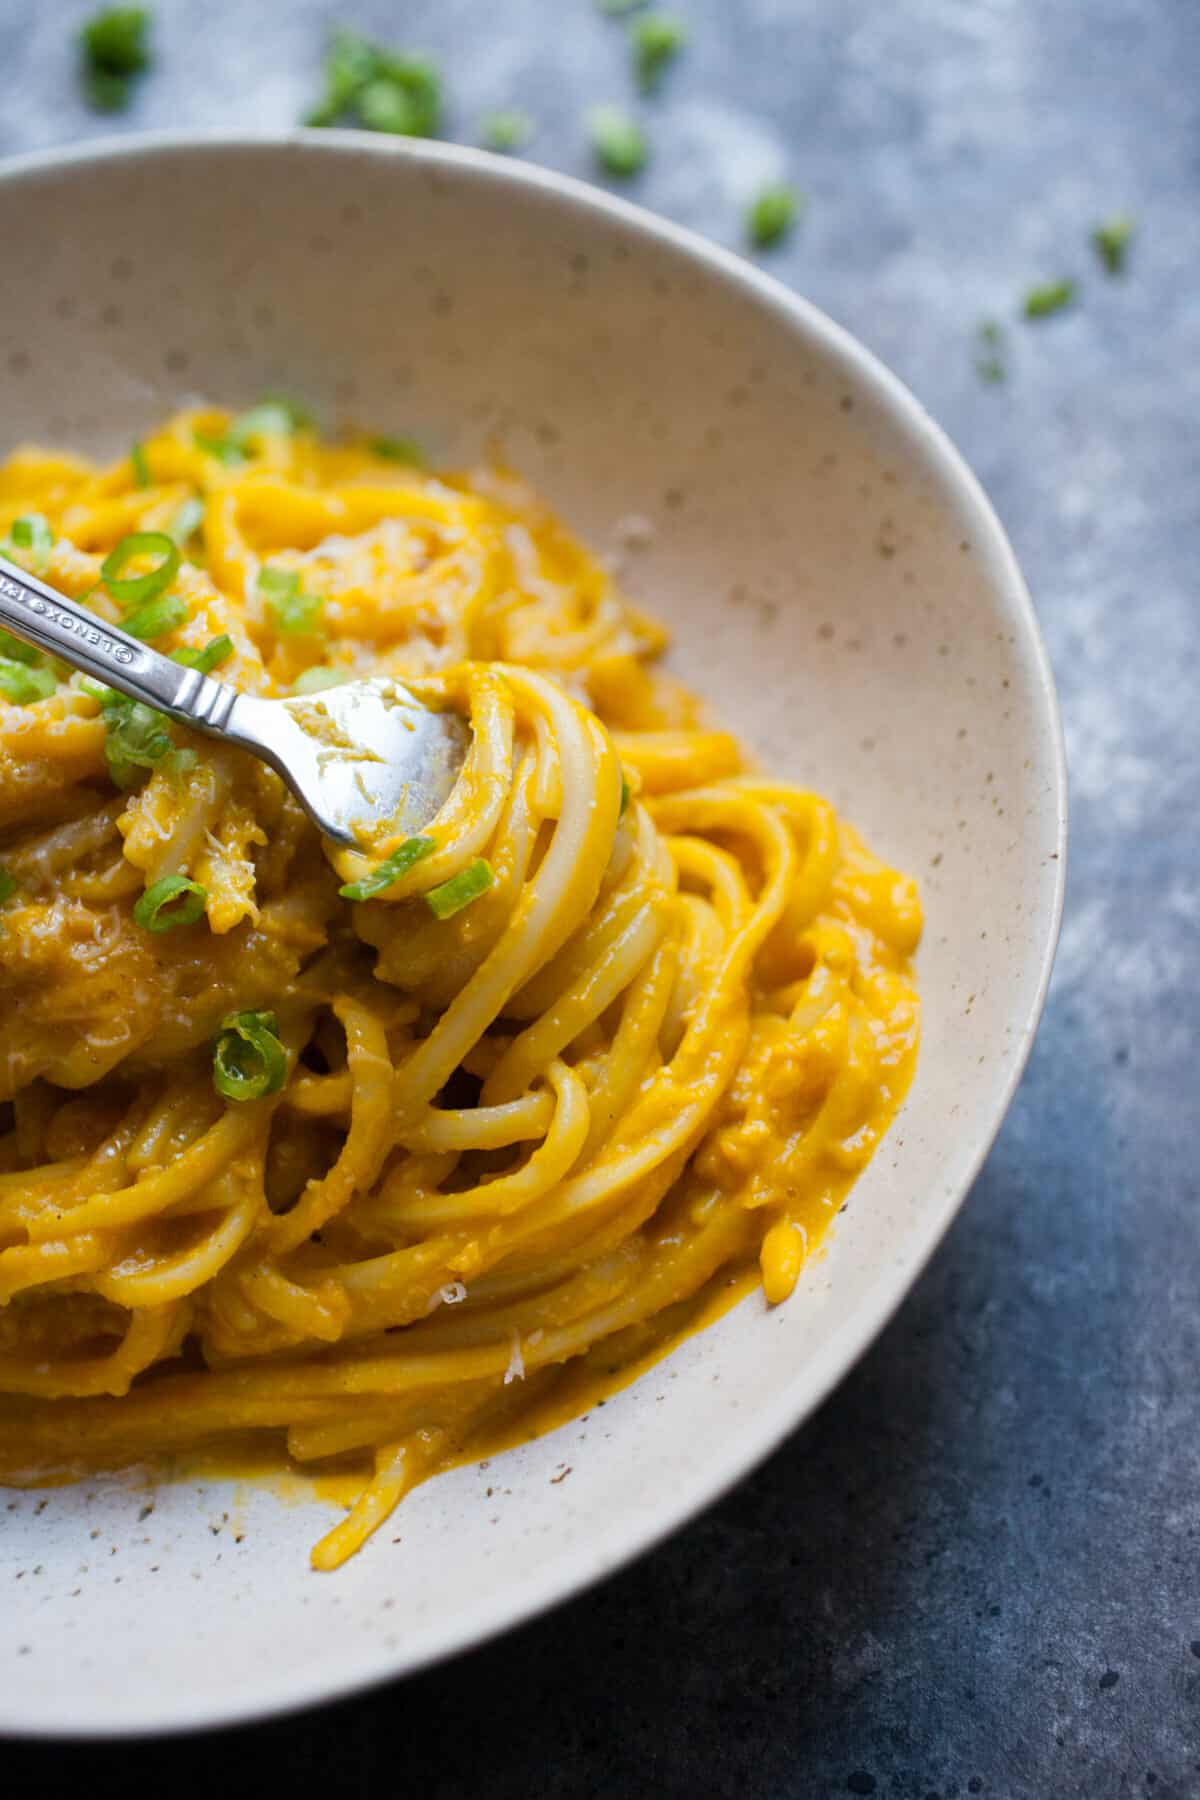 Creamy Kabocha Squash Noodles: These delicious and hearty noodles are made with blended squash plus a few simple ingredients. You're going to love this quick hearty winter noodle dish! | macheesmo.com